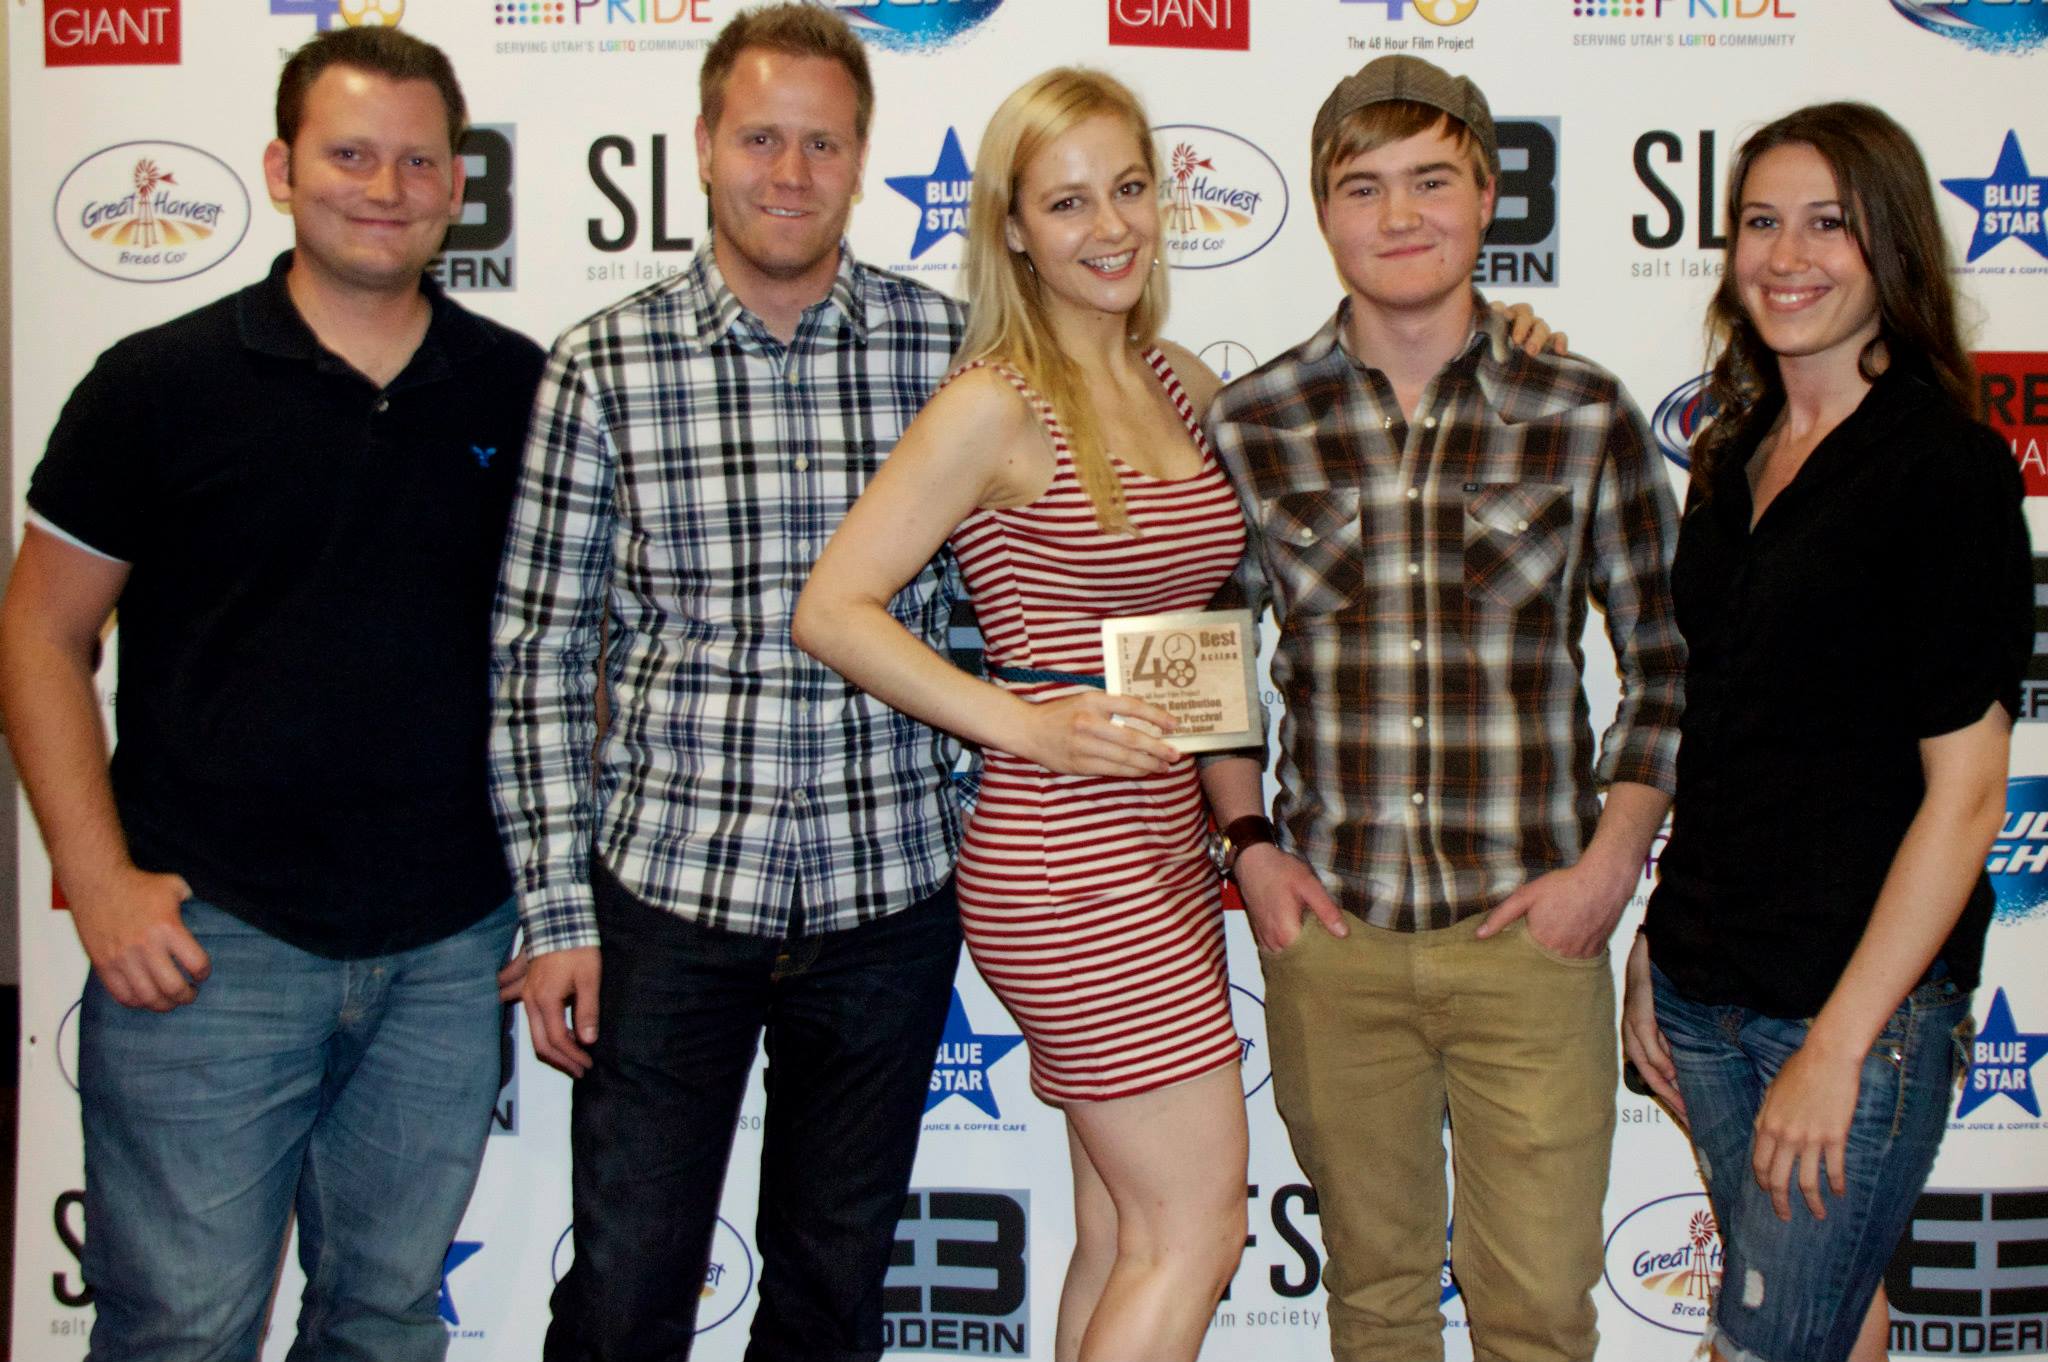 Amy Lia with some of the crew of The Retribution of Tom Percival at the 48 Hour Film Fest Award Show. Amy Lia is holding the plaque for 